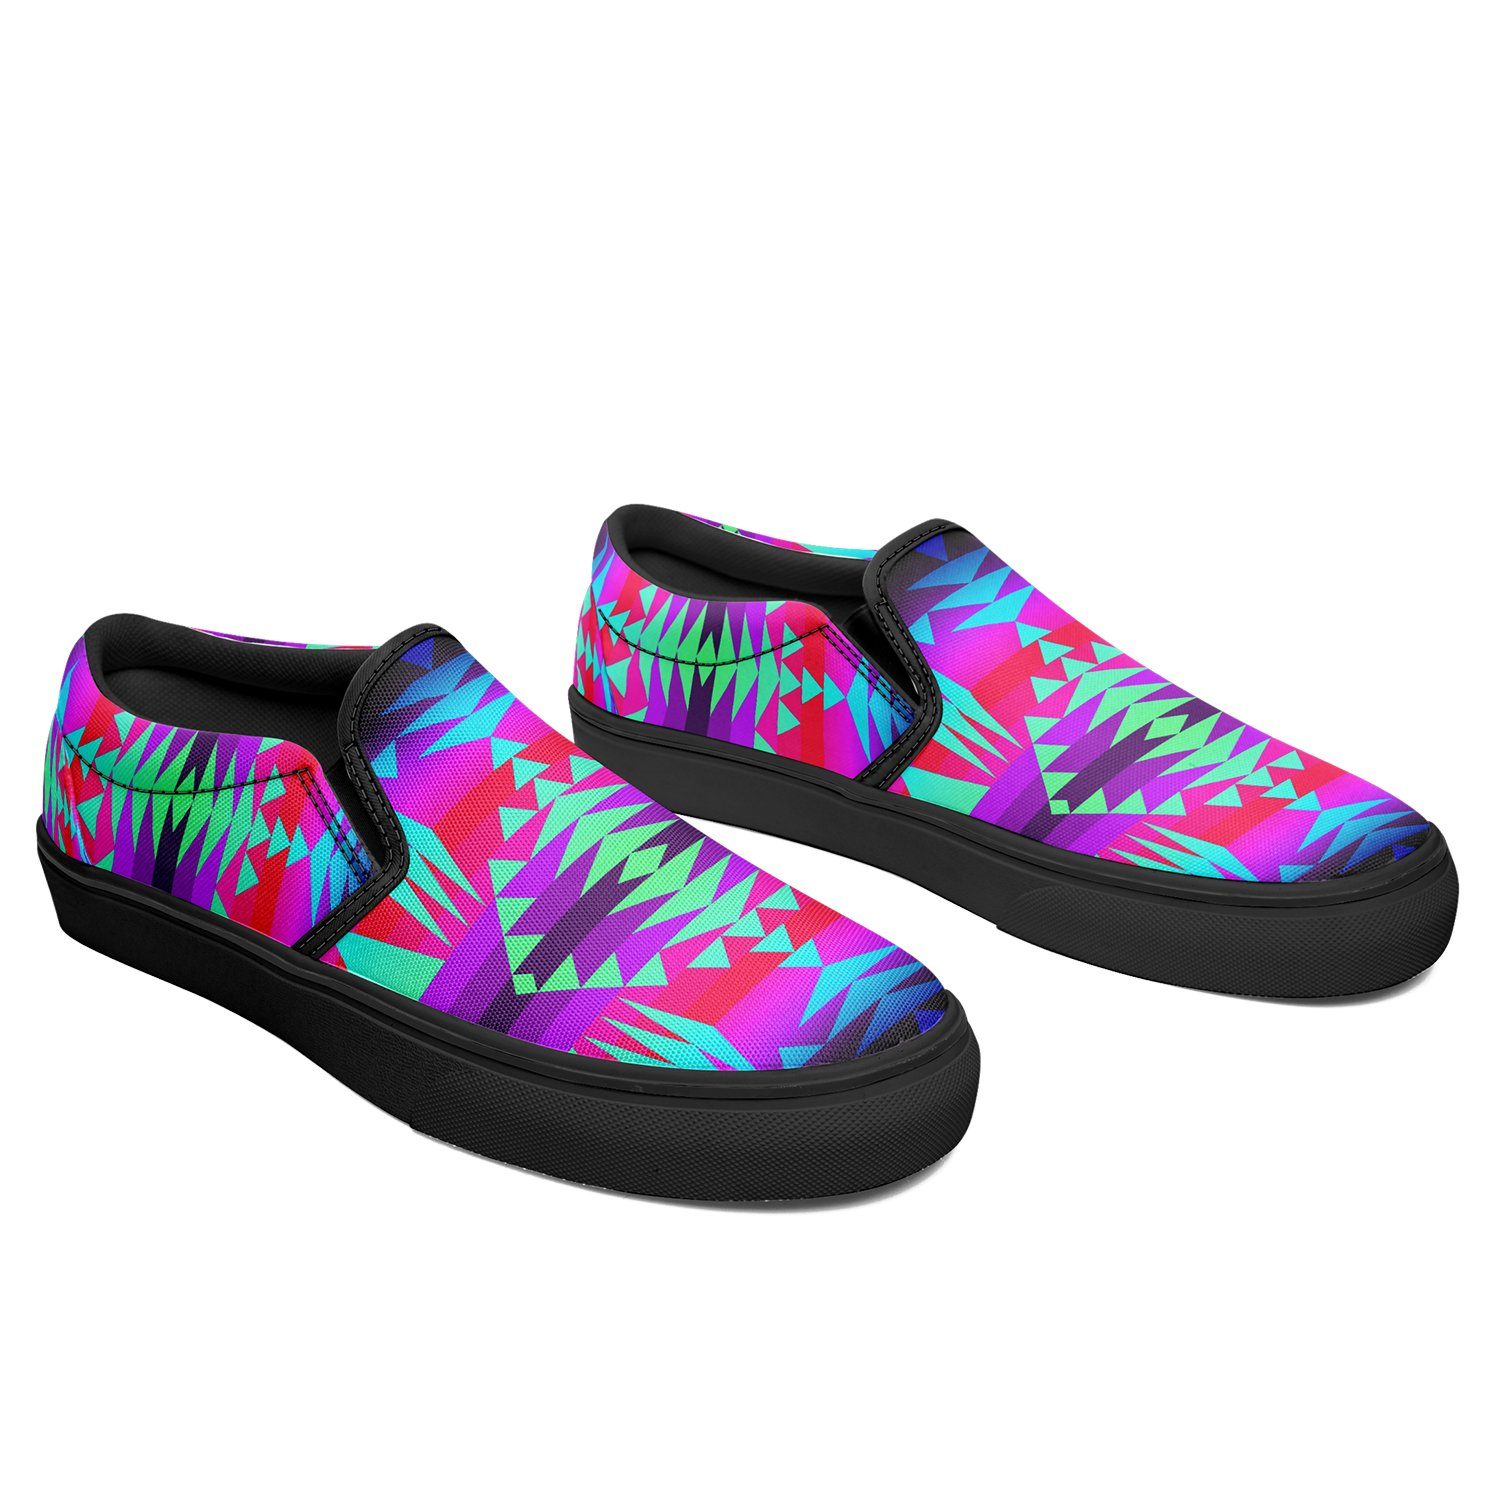 Between the Rocky Mountains Otoyimm Canvas Slip On Shoes 49 Dzine 